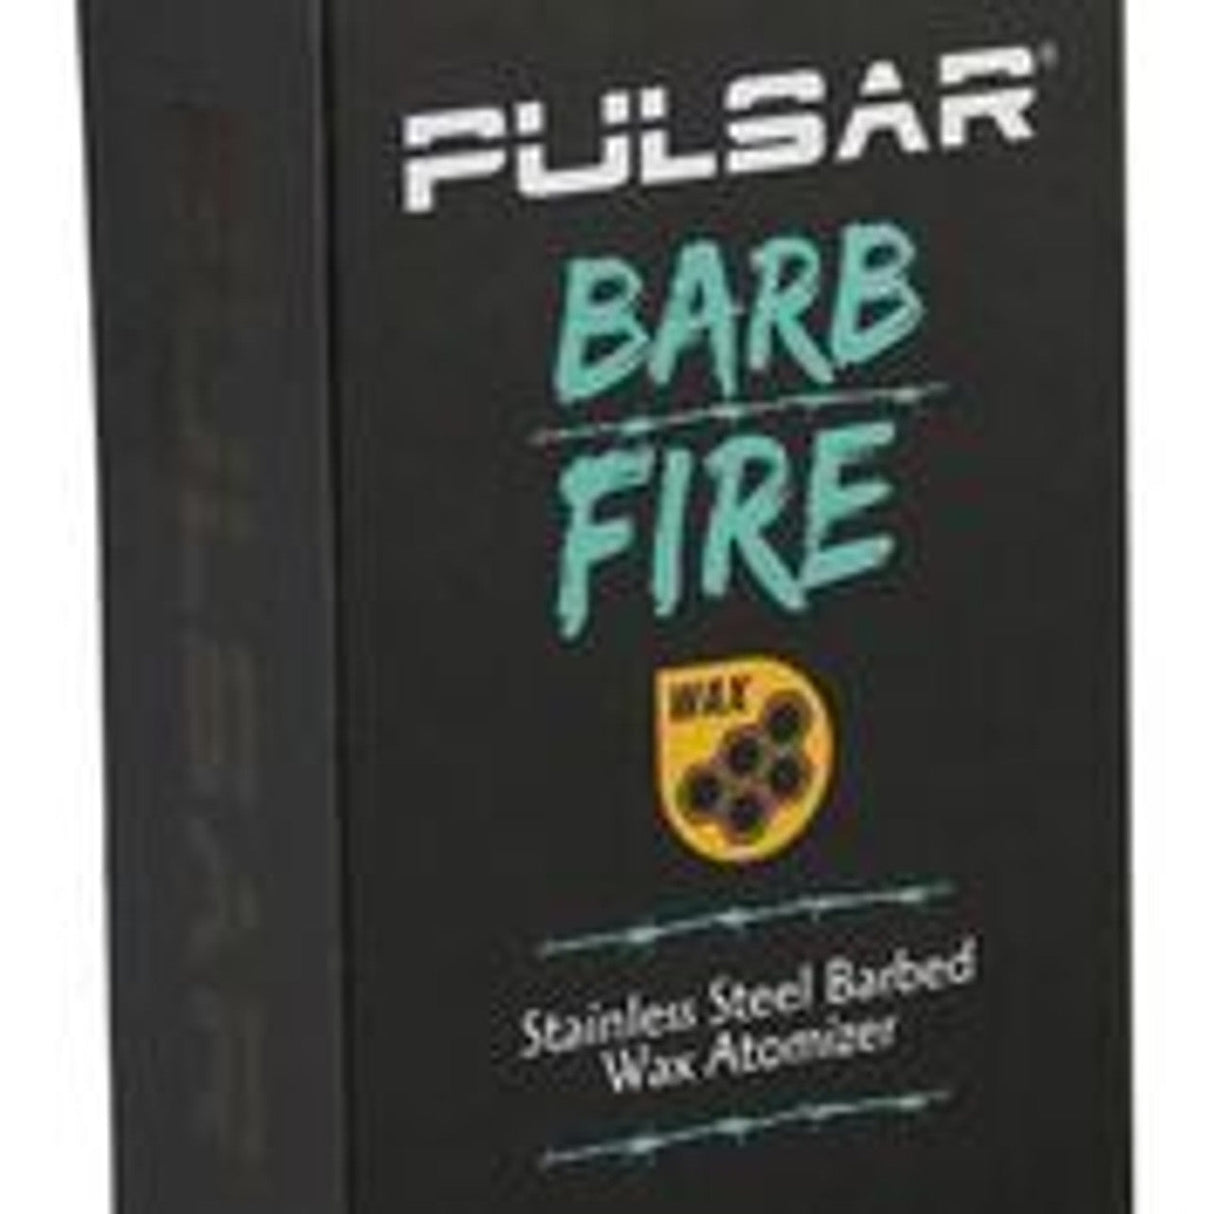 Pulsar Barb Fire Wax Mod Atomizer packaging, highlighting the double ribbon coil feature.